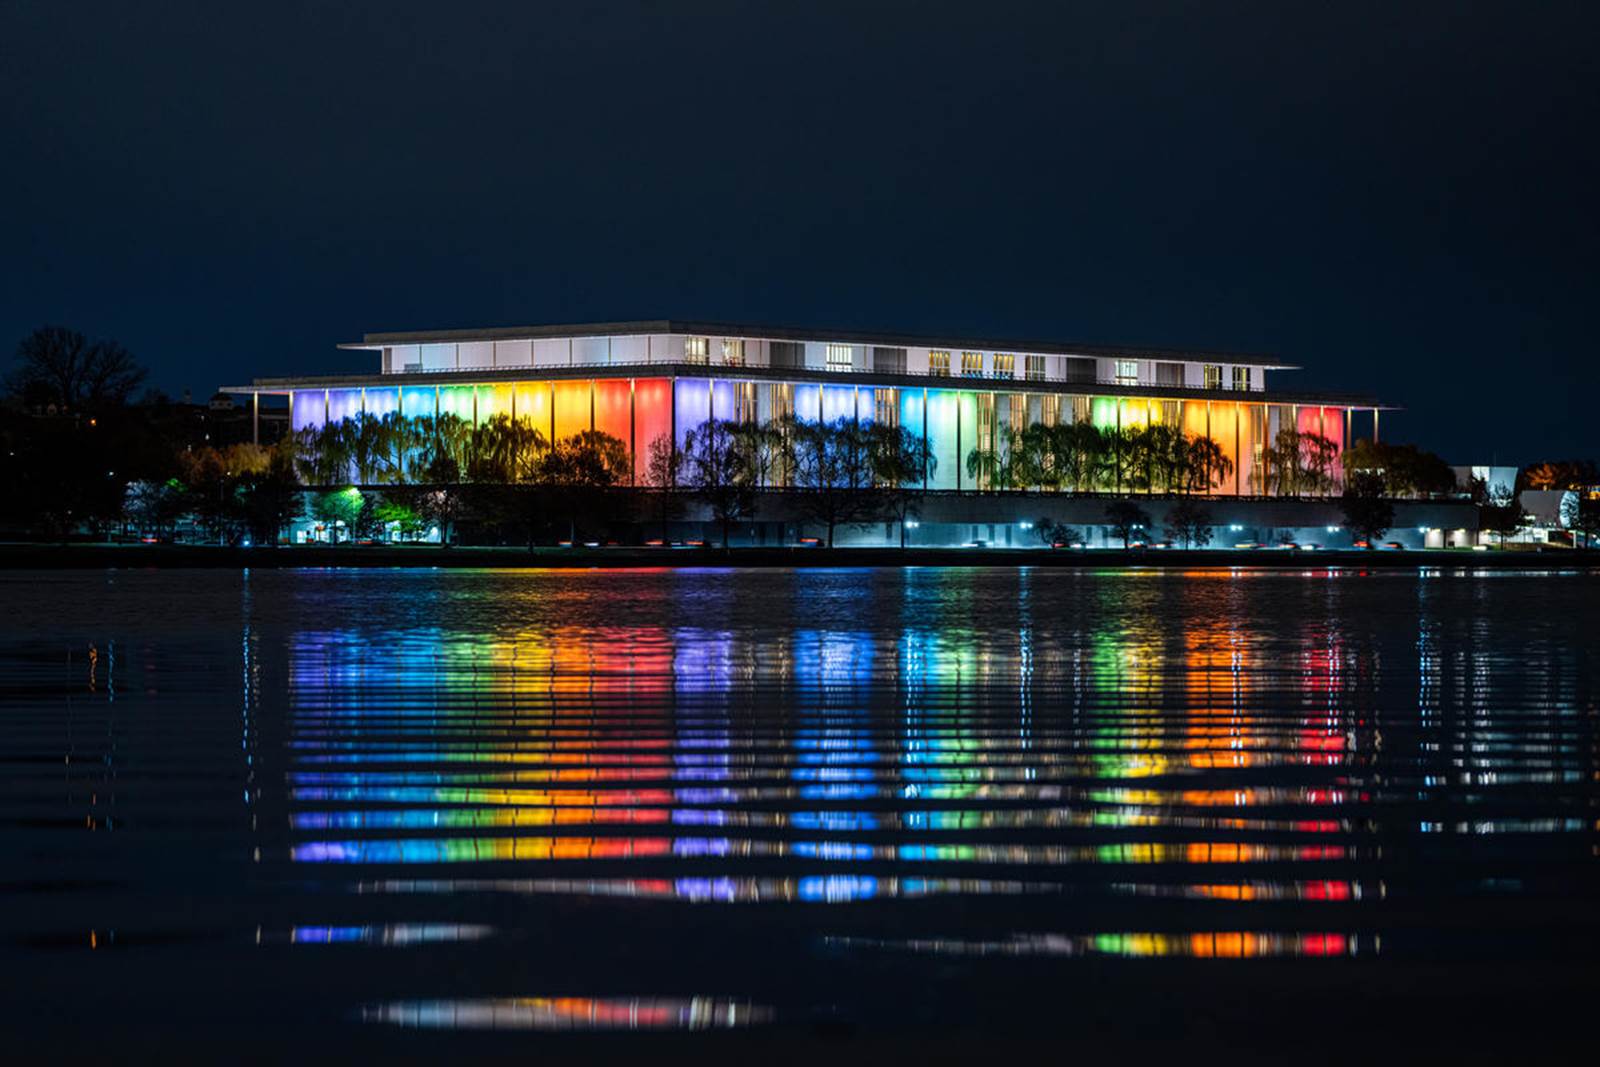 The John F. Kennedy Center for the Performing Arts lit up in the colors of the rainbow for the annual Honors celebration.